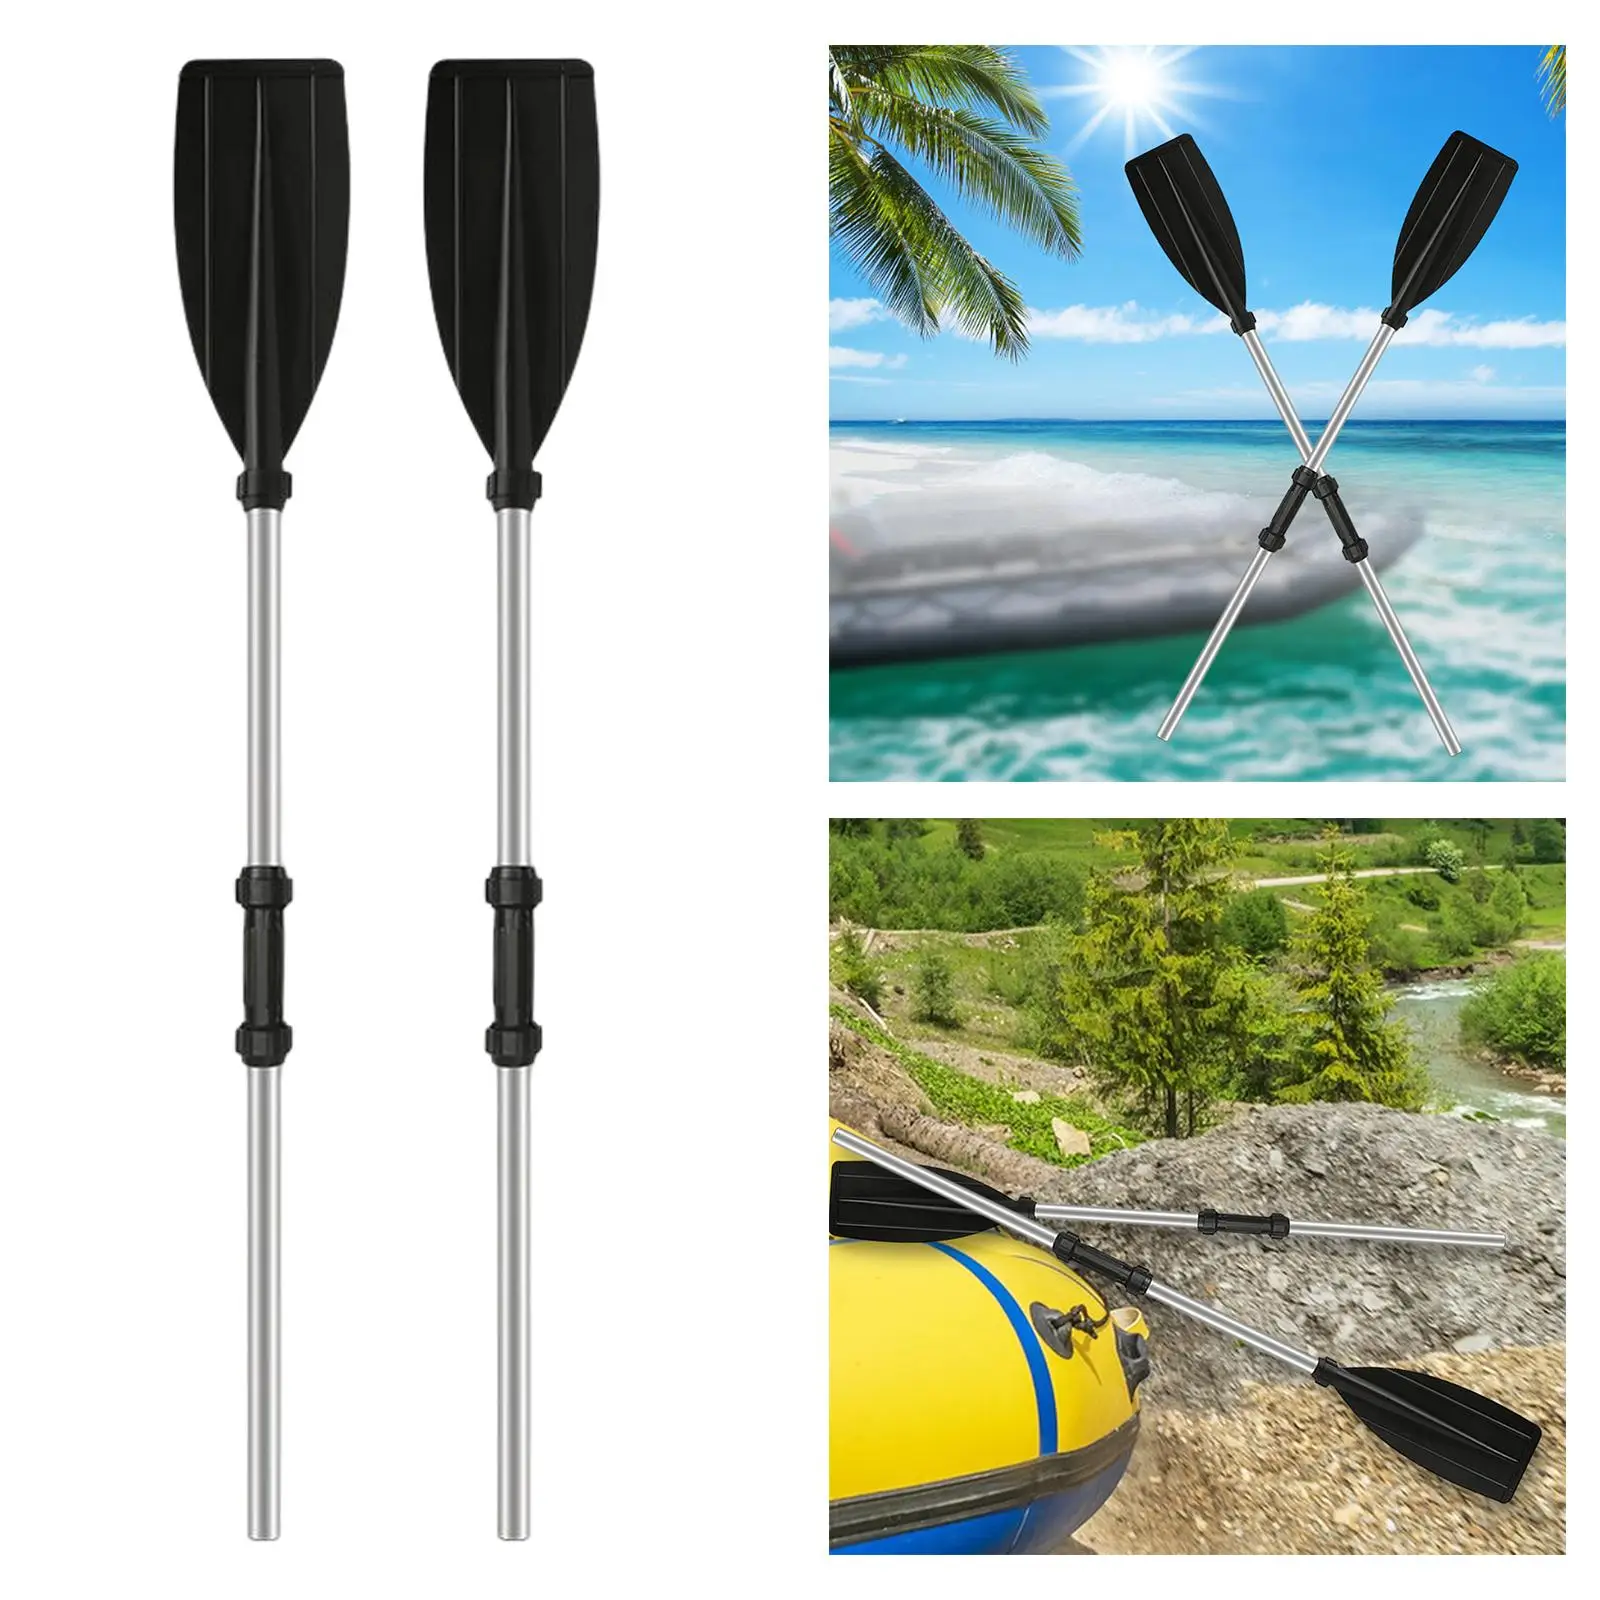 Universal Kayak Boat Rafting Paddle Aluminium Alloy Accessories for Surfing Rafting